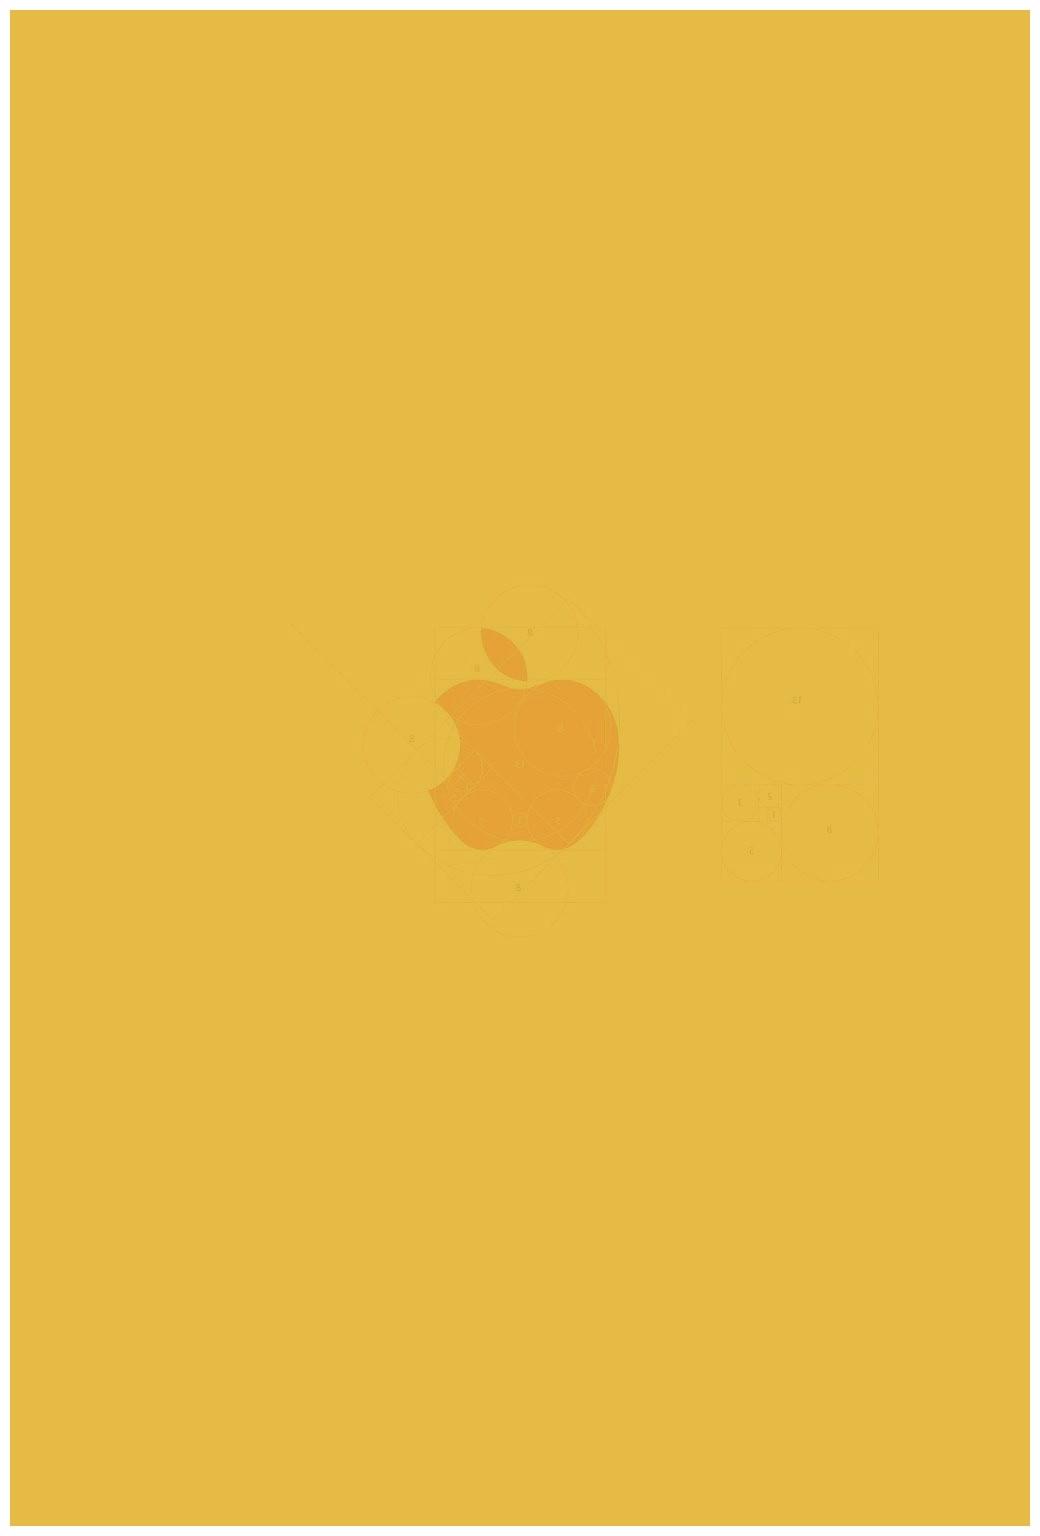 Yellow Aesthetic Tumblr Wallpapers Top Free Yellow Aesthetic Tumblr Backgrounds Wallpaperaccess